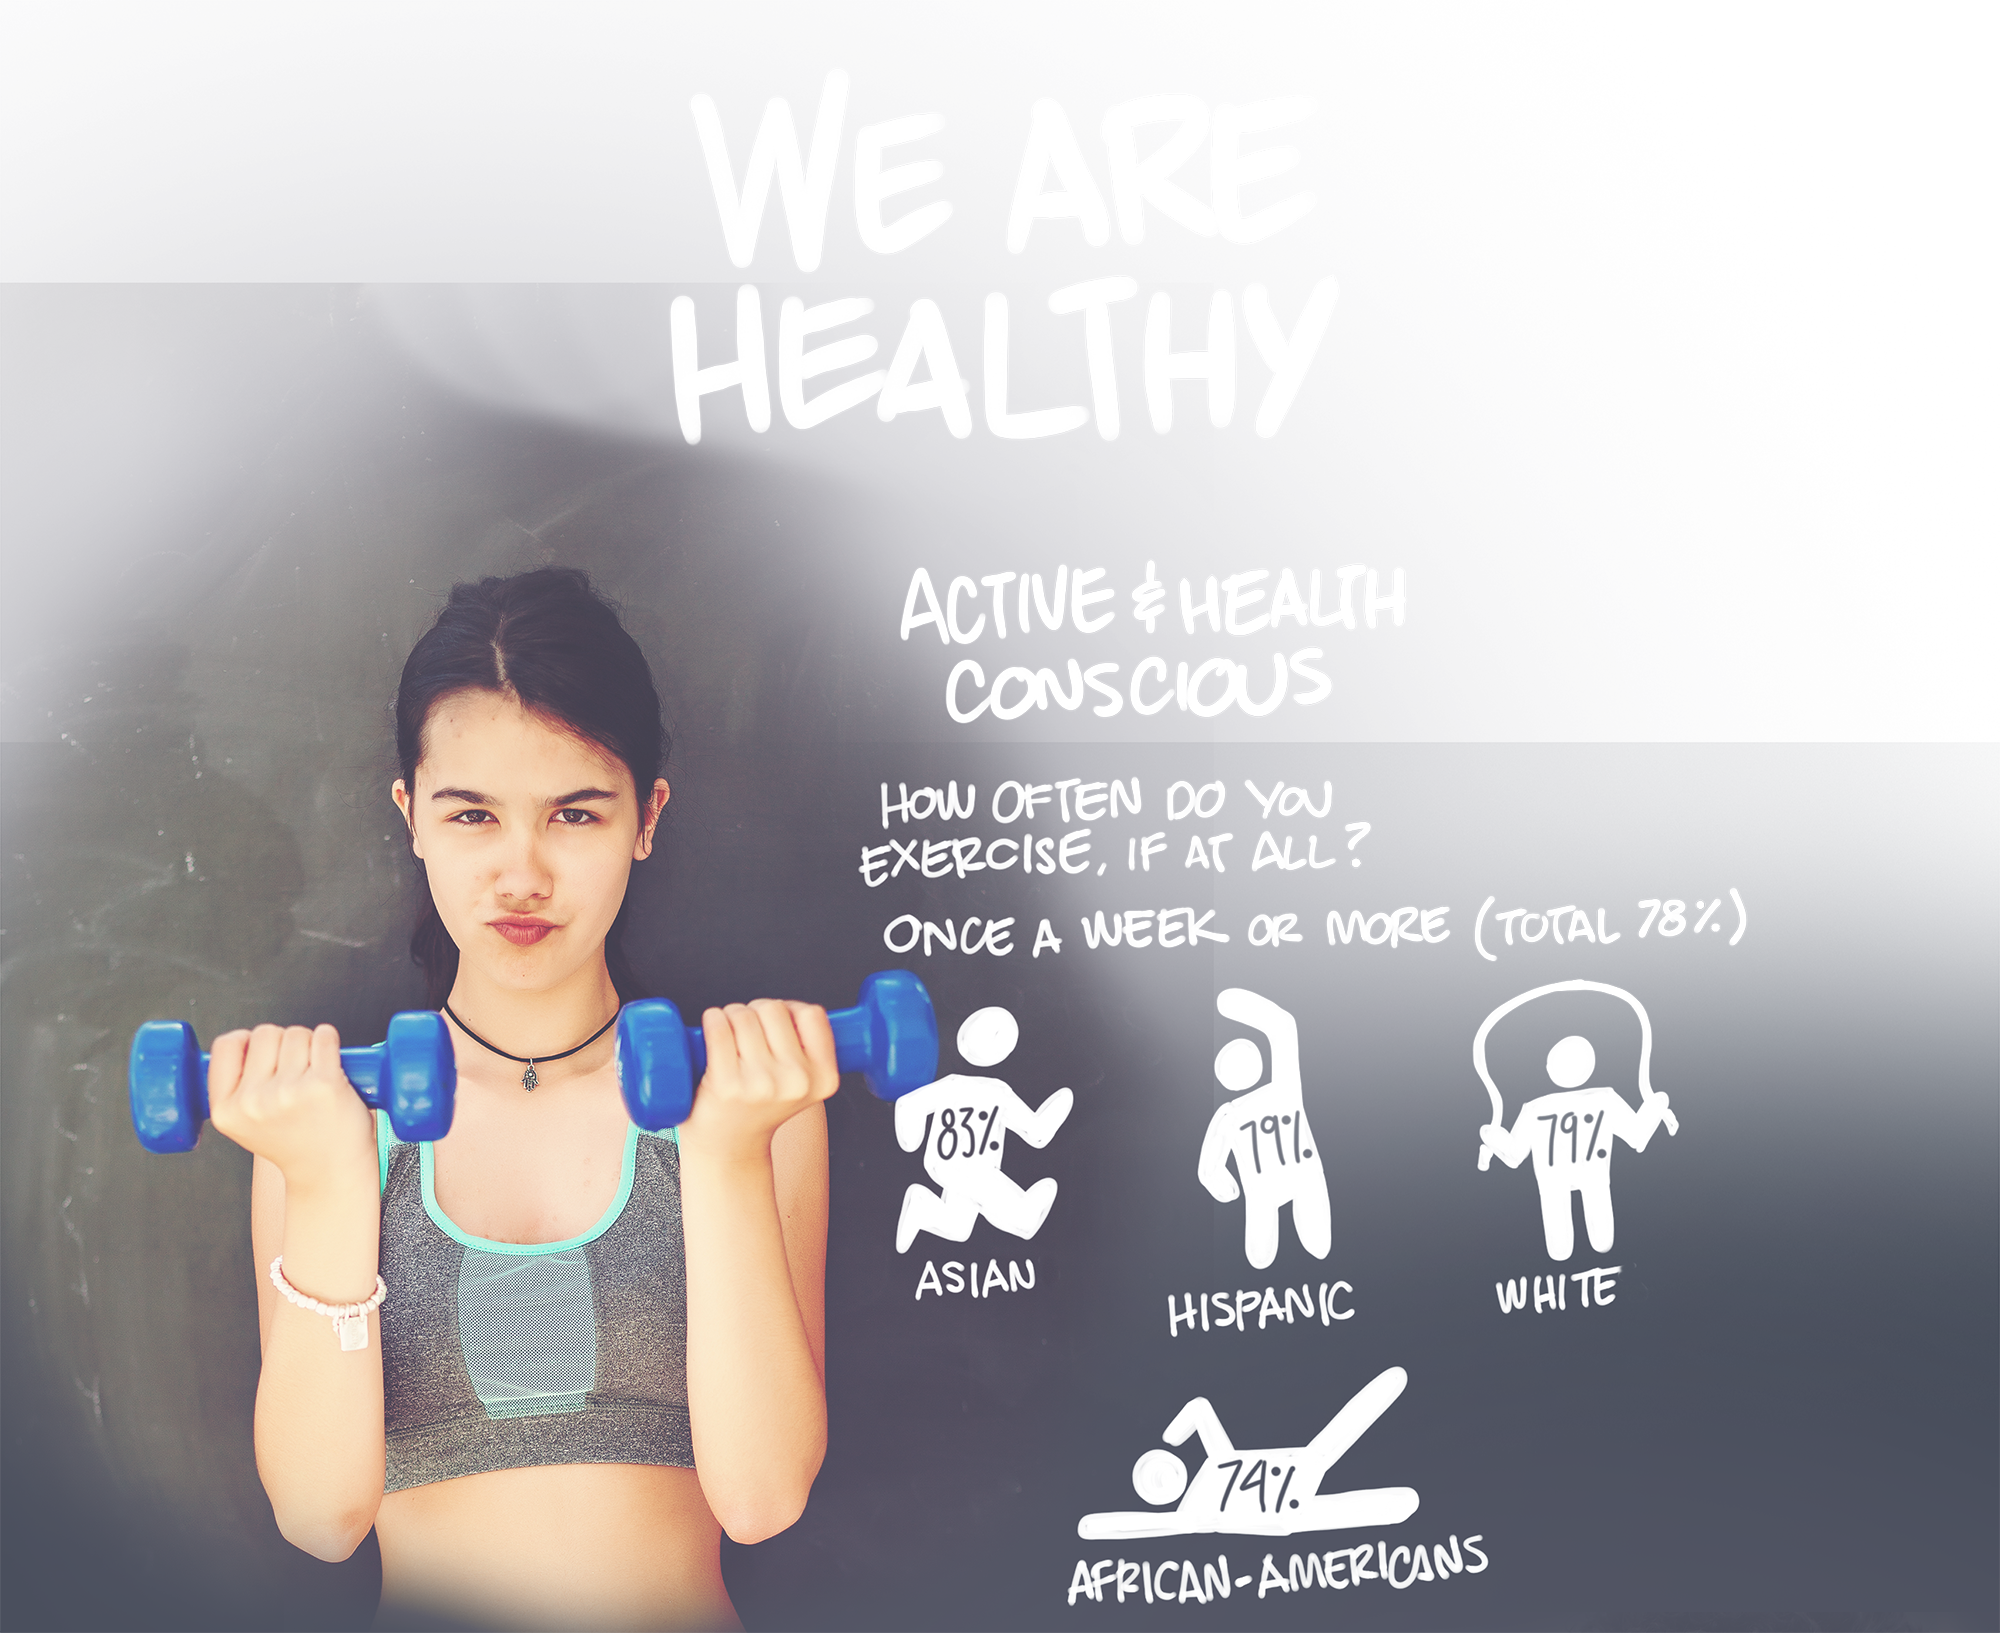 We are healthy! Active Health Conscious. How often do you exercise, if at all. Once a week or more (Total 78%). Asian - 83%, Hispanic - 79%, White - 79%, African Americans - 74%